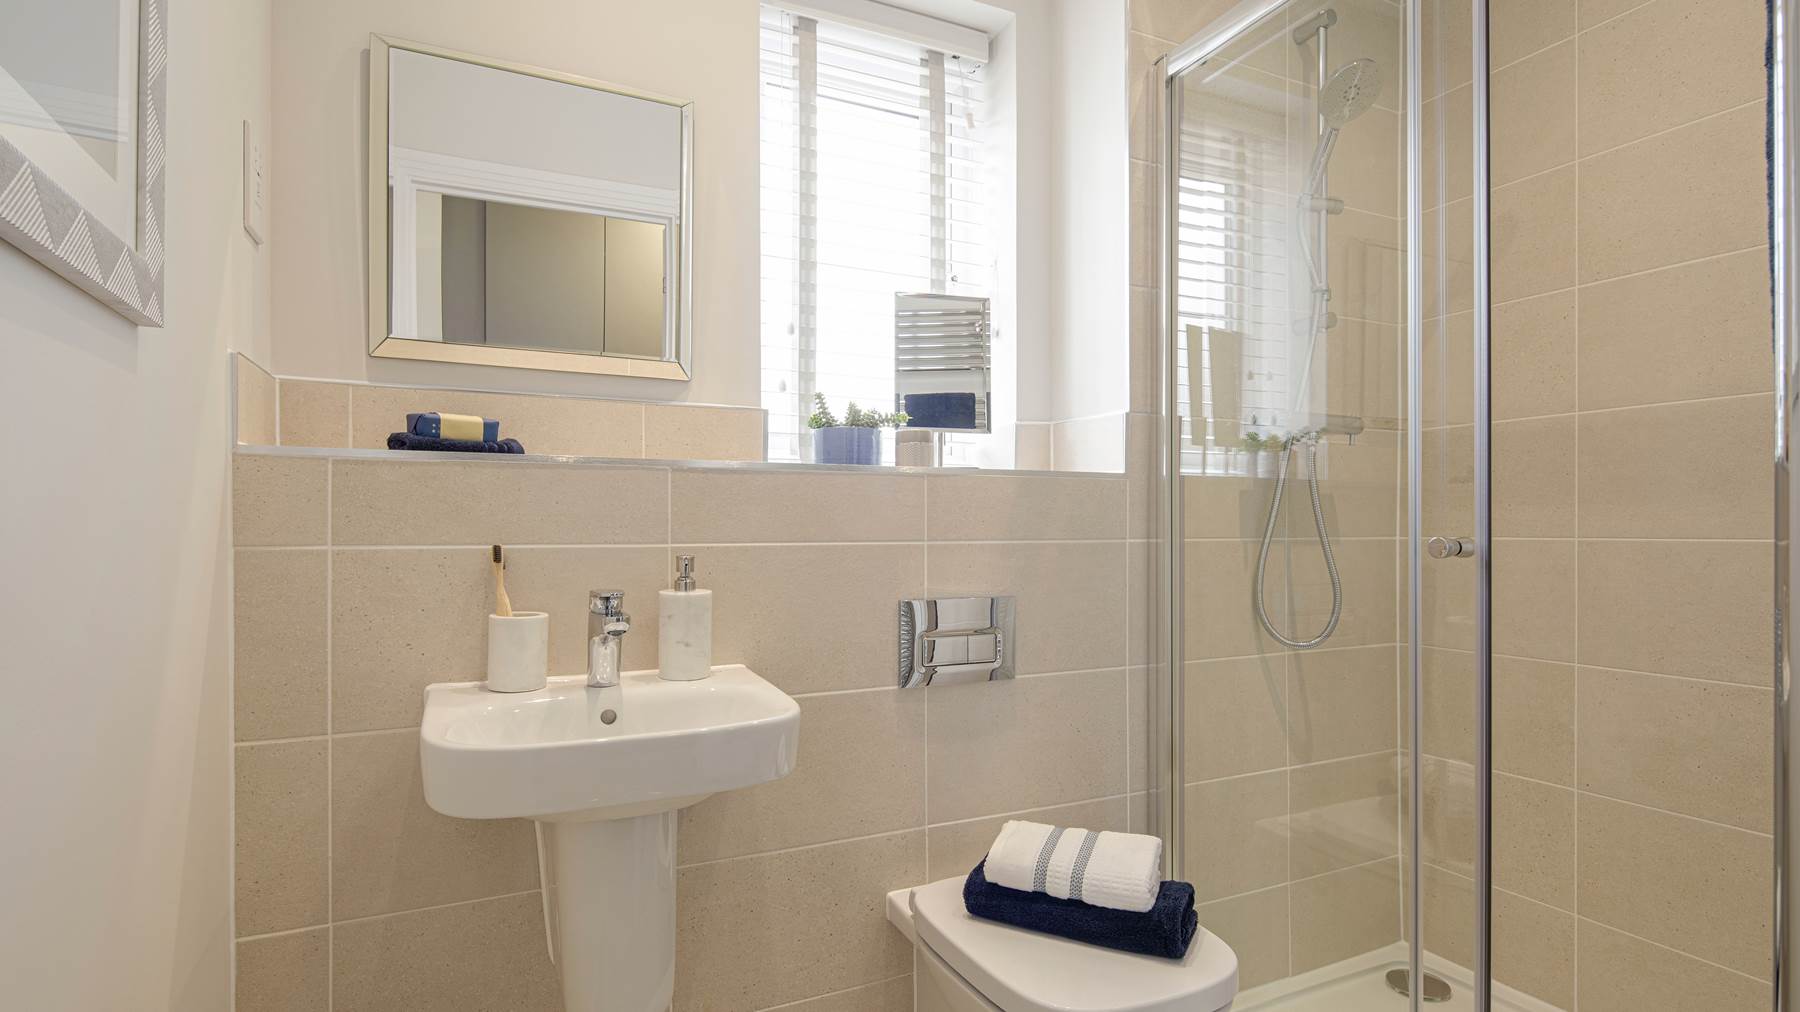 Bathroom of house for sale in Alton, Hampshire